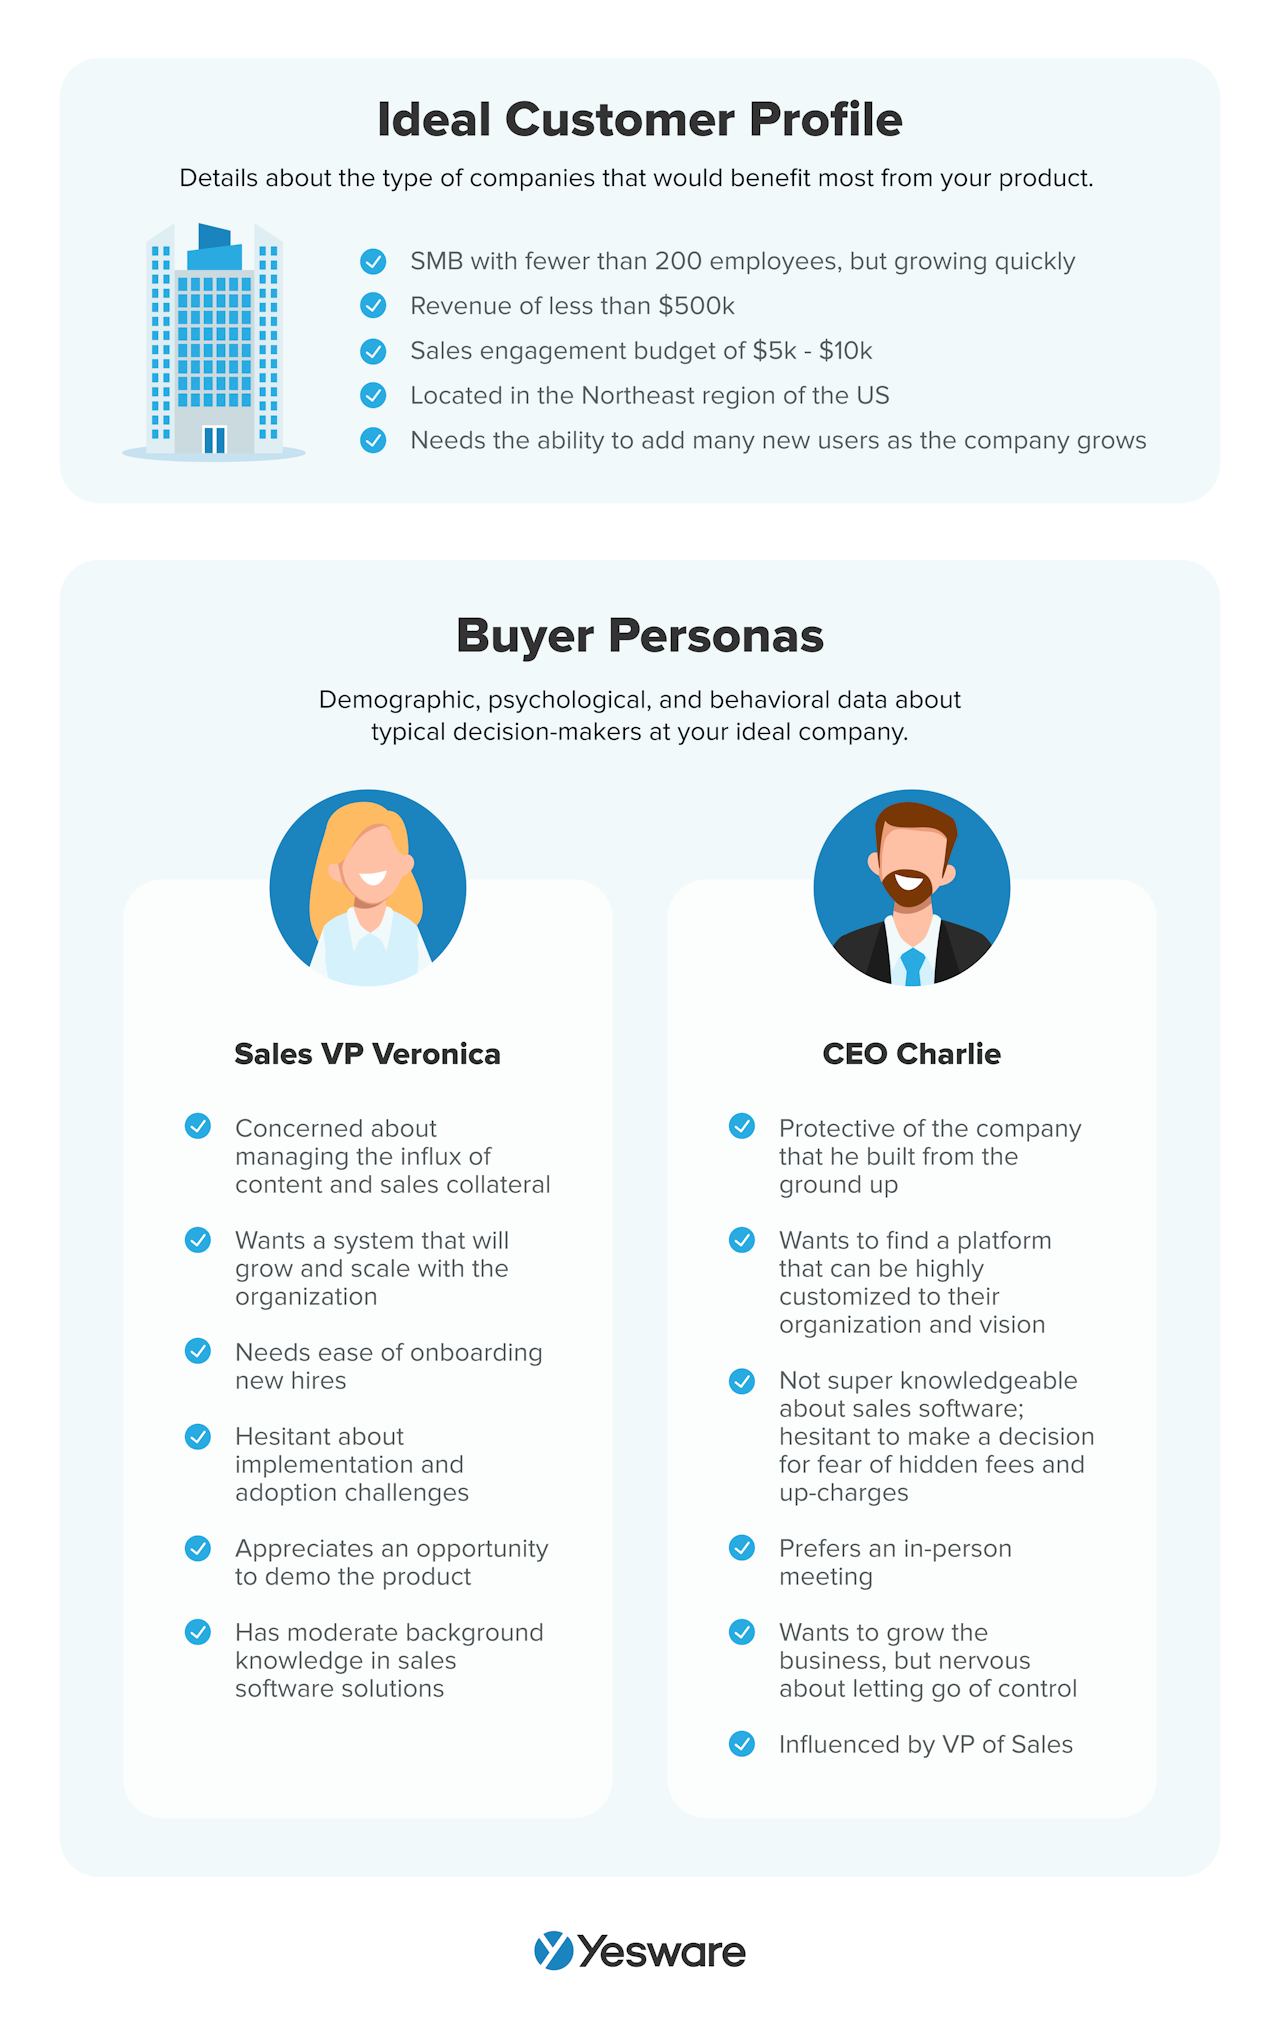 Law of Reciprocity: ideal customer profile and buyer persona